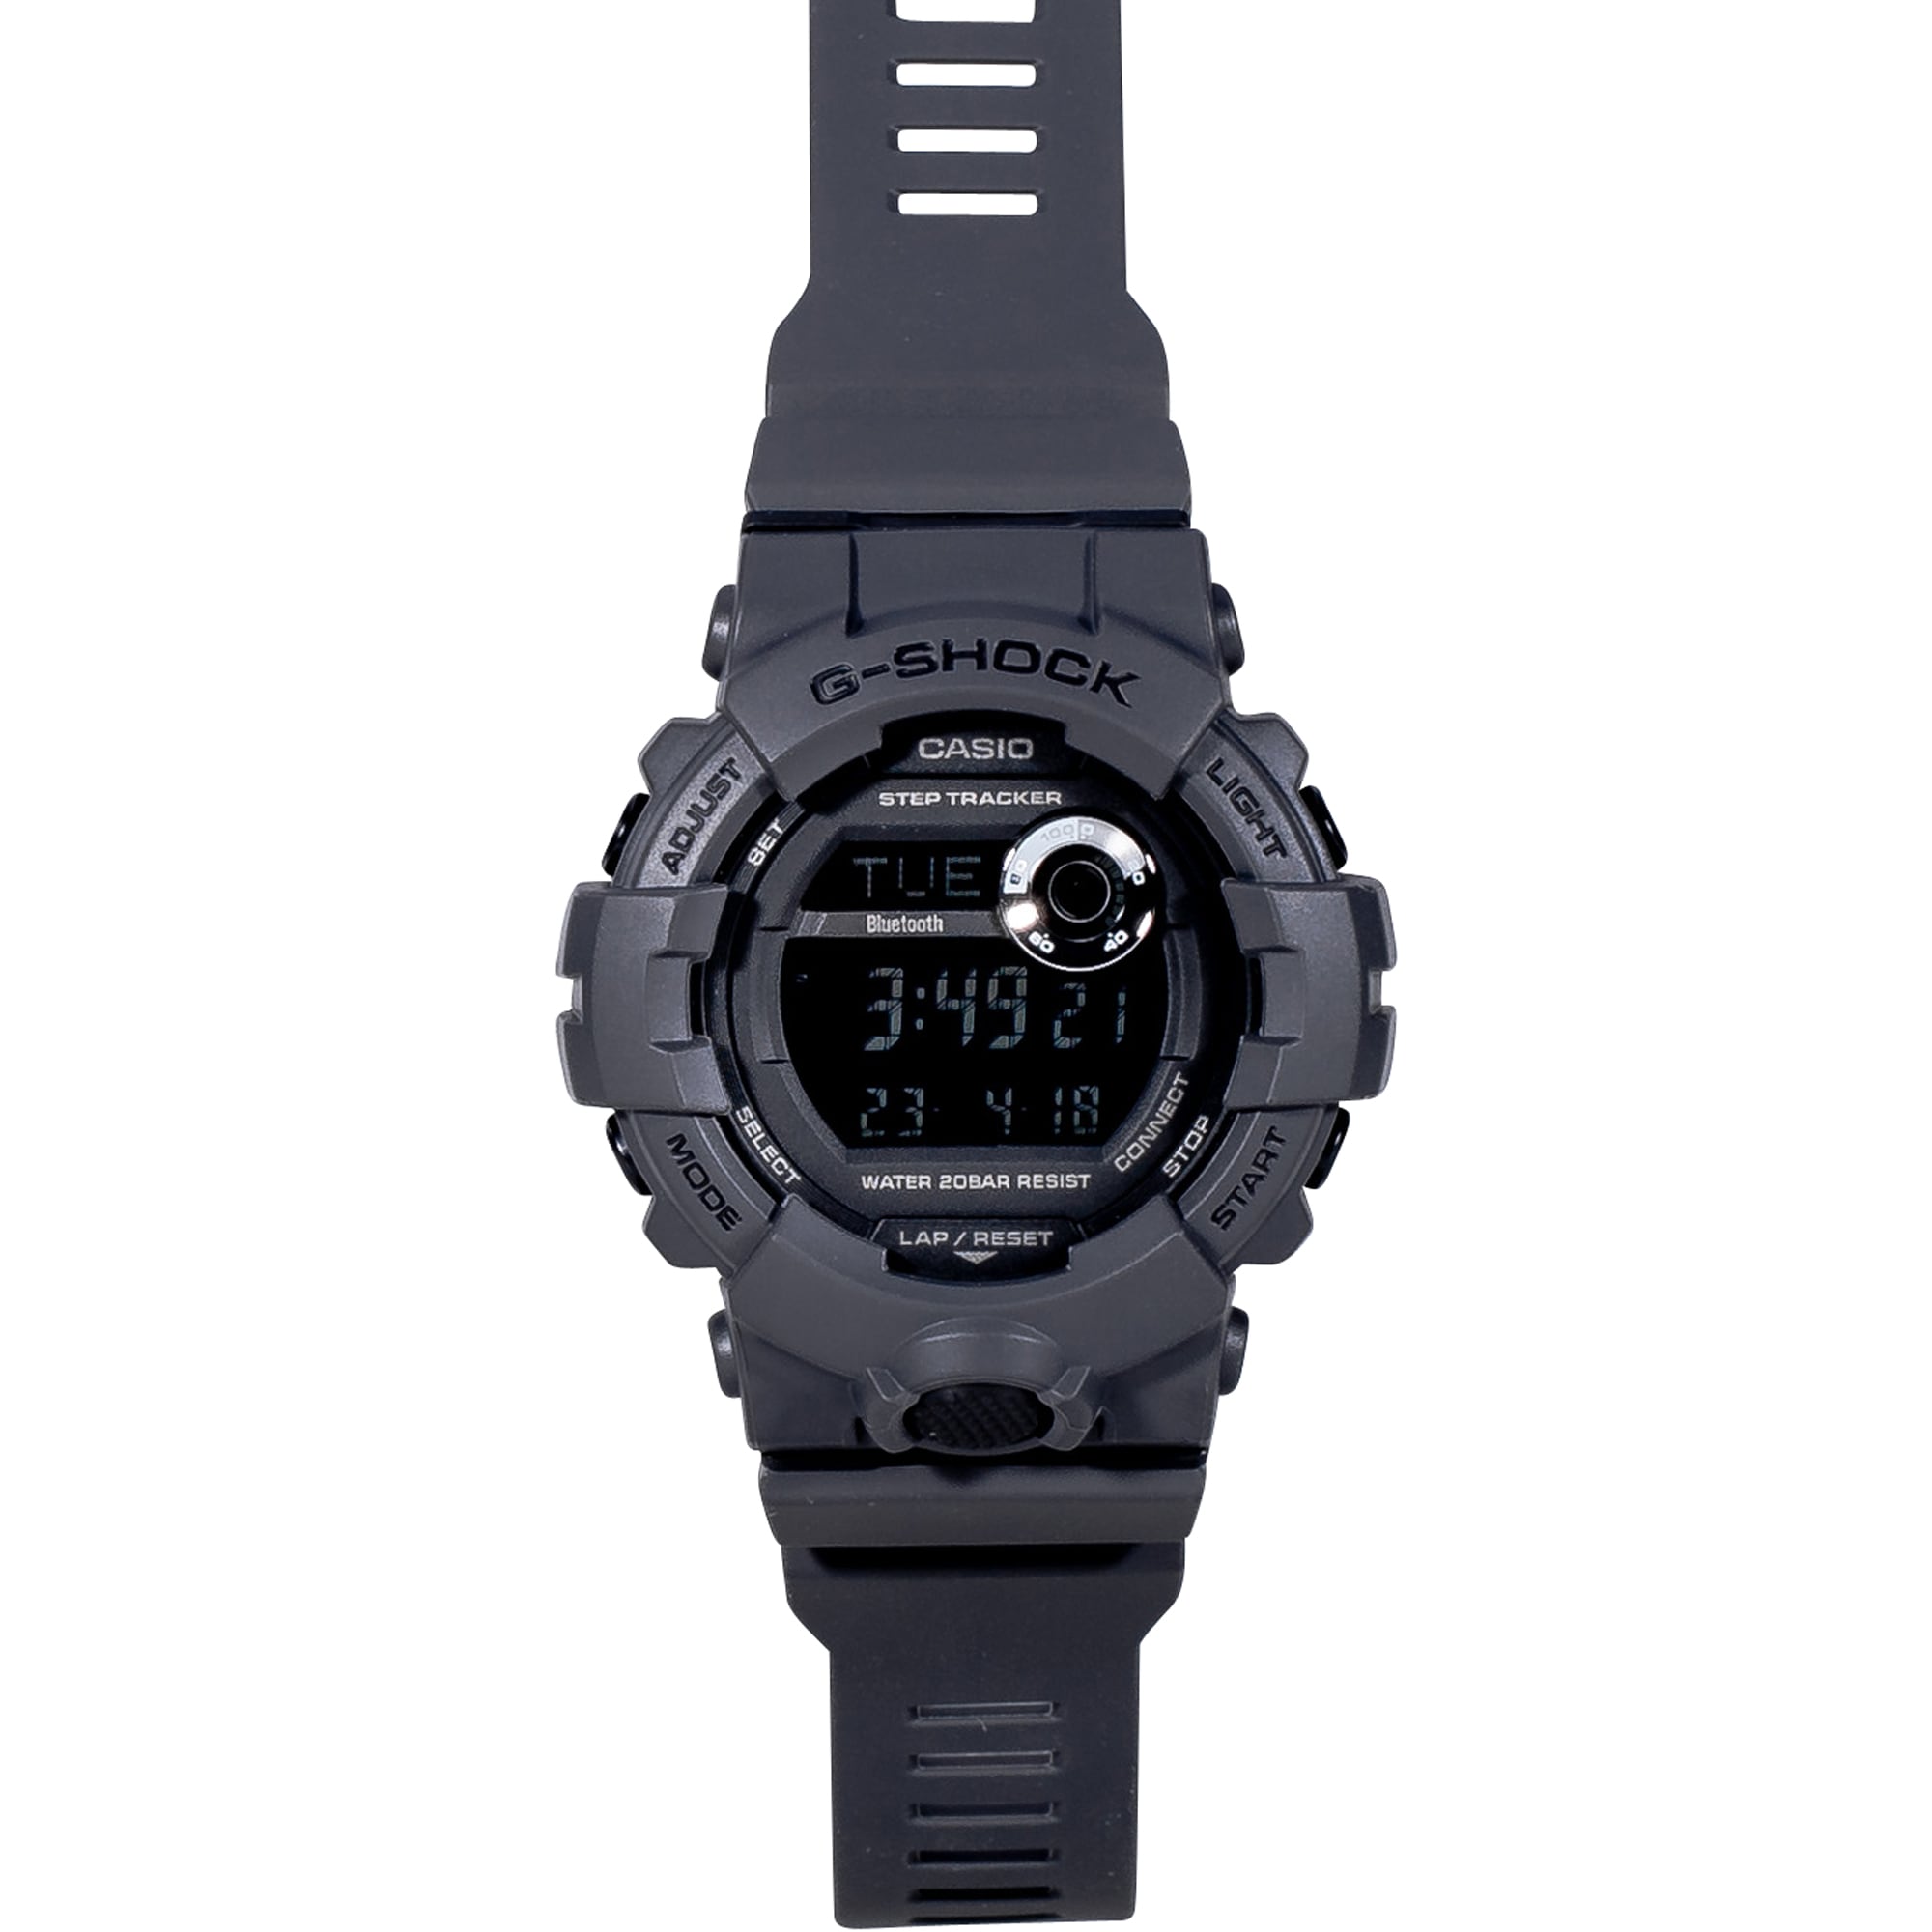 Purchase the by Casio Watch G-Shock G-Squad black GBD-800UC-8ER